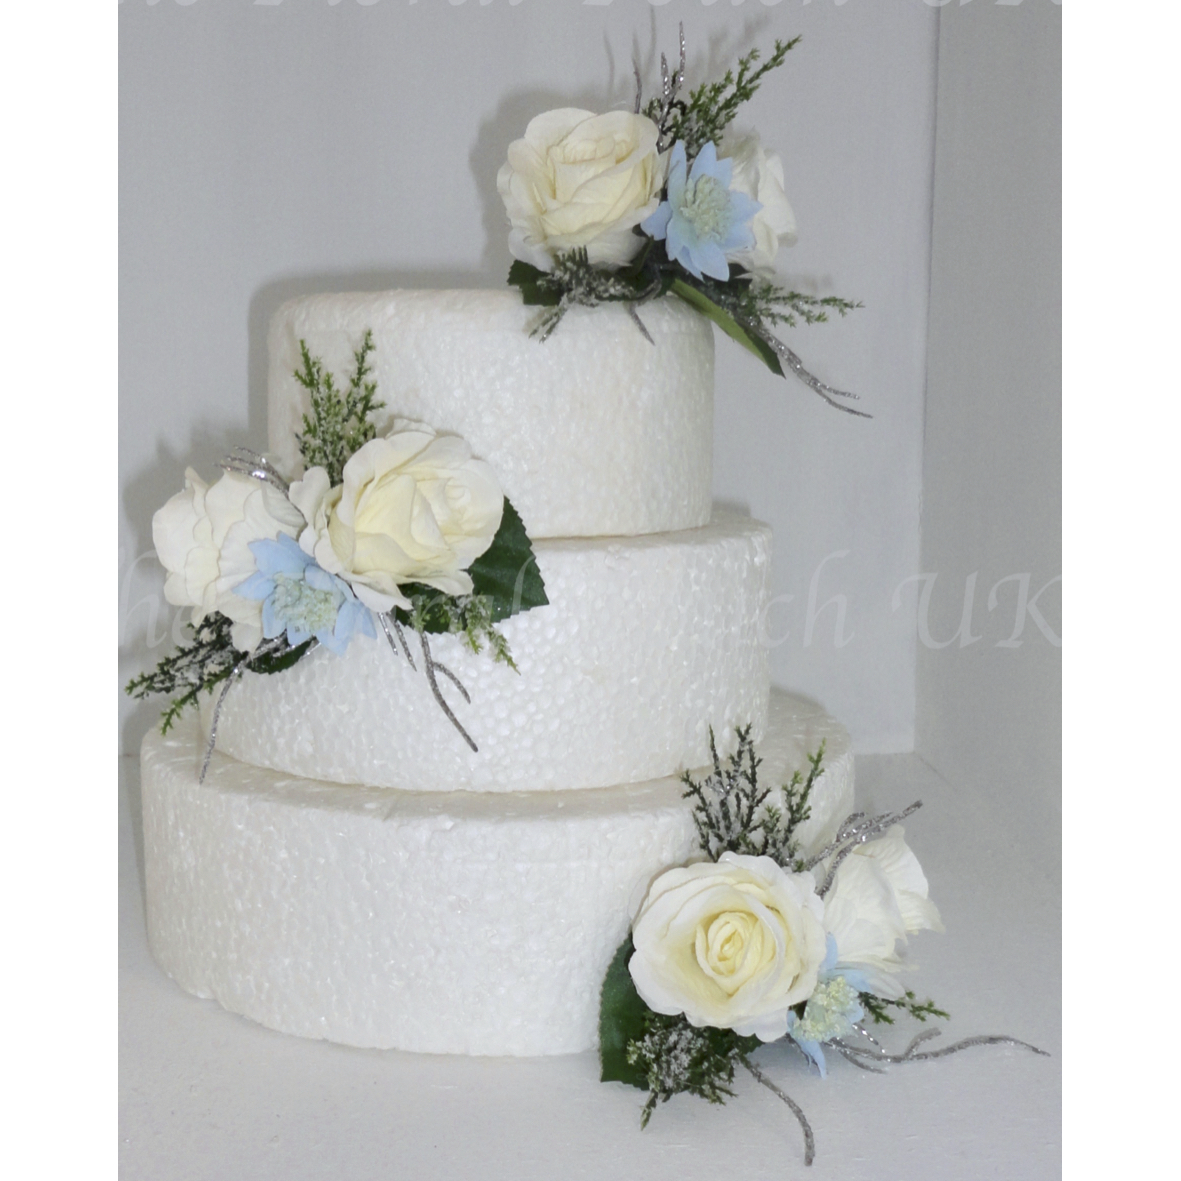 Ivory silk roses with pale blue Astrantia 

Cypress sparkly pine foliage with silver twig sprays